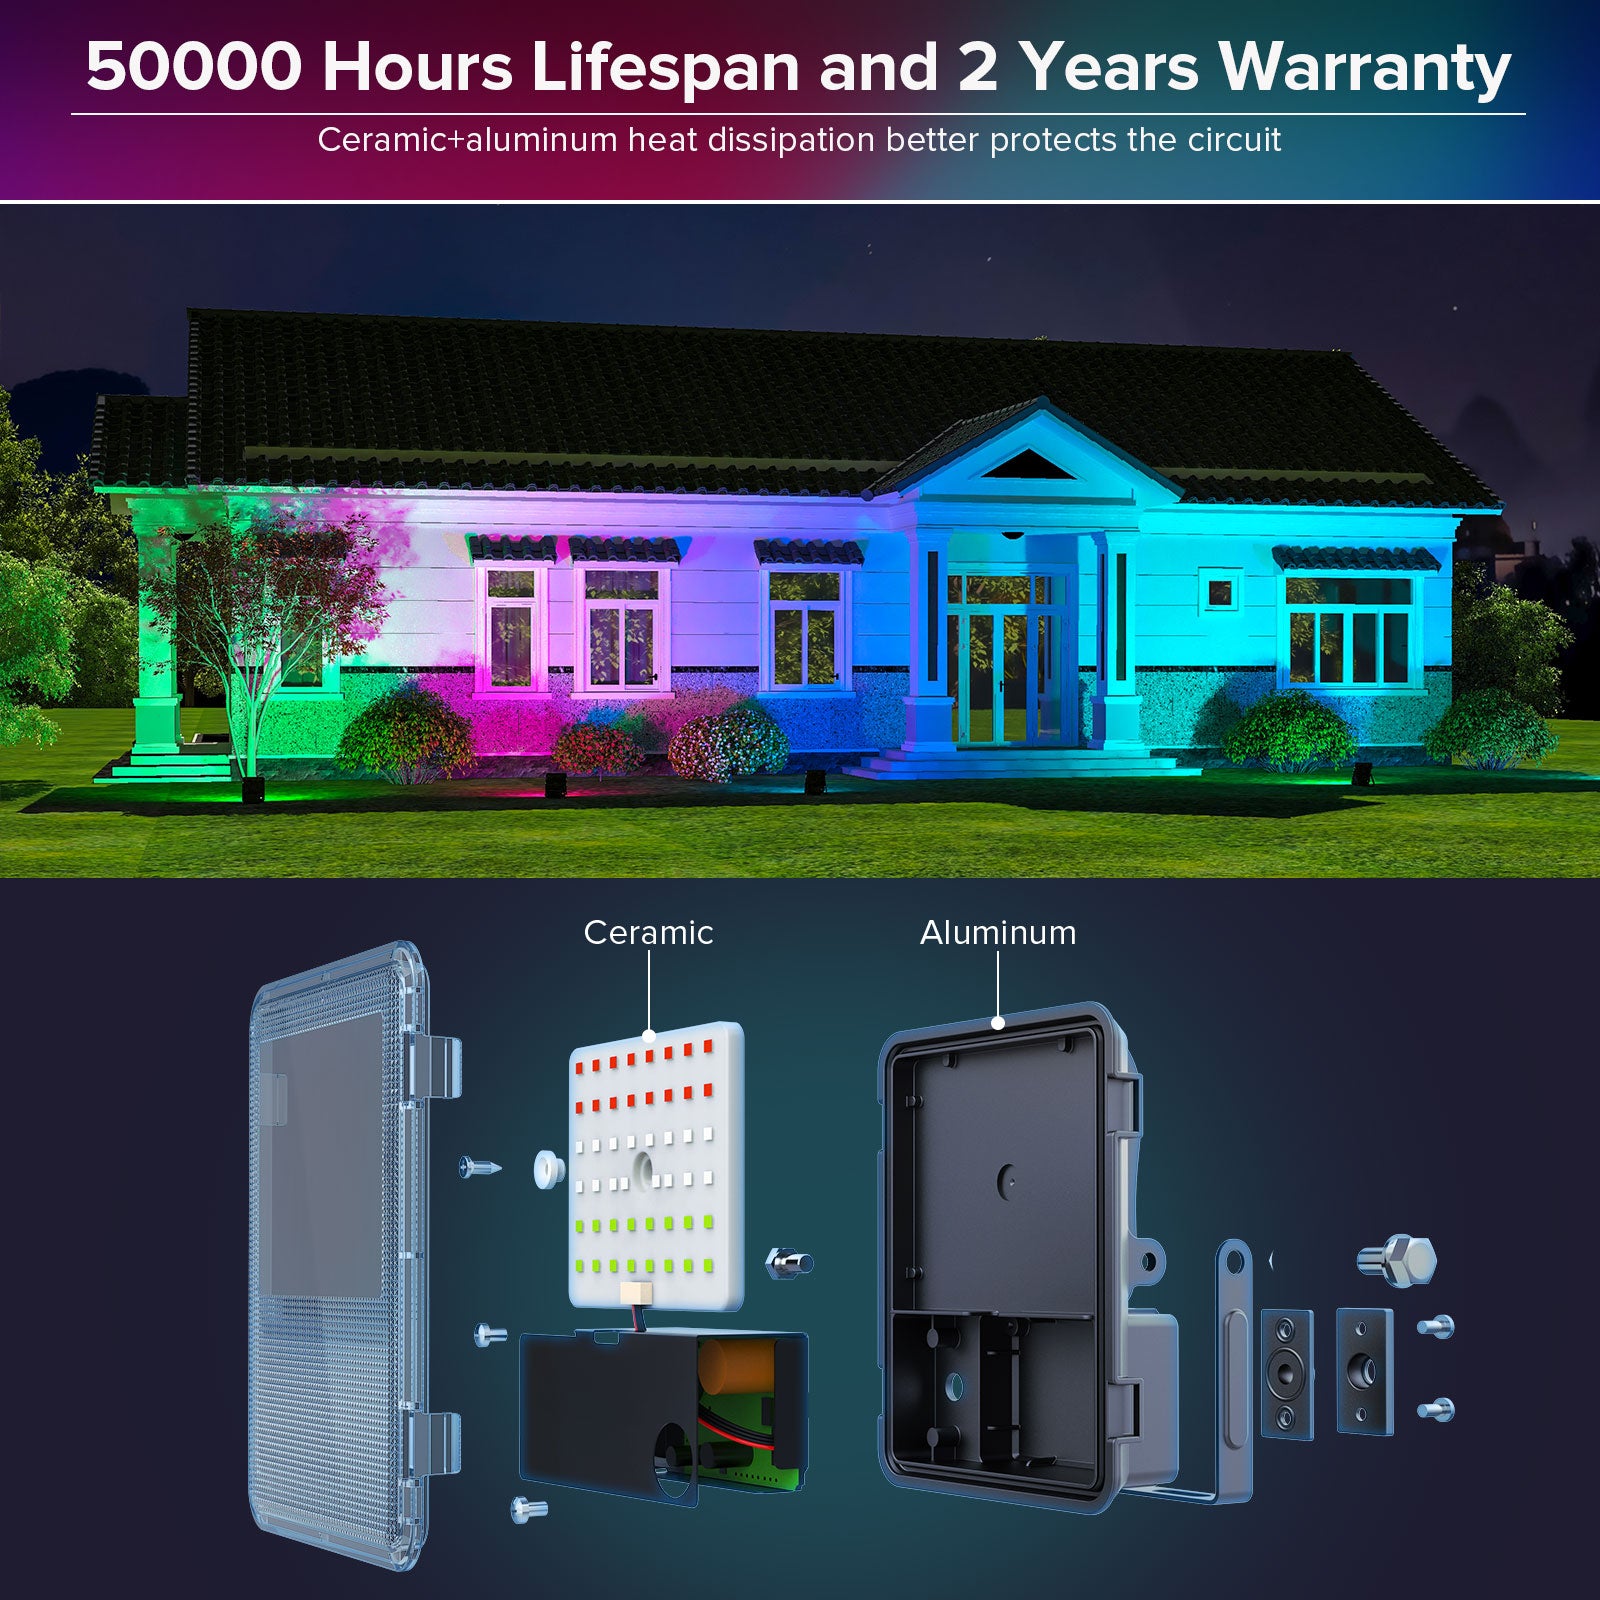 80W RGB Led Flood Light (US ONLY) provides 50000 Hours Lifespan and 2 Years Warranty